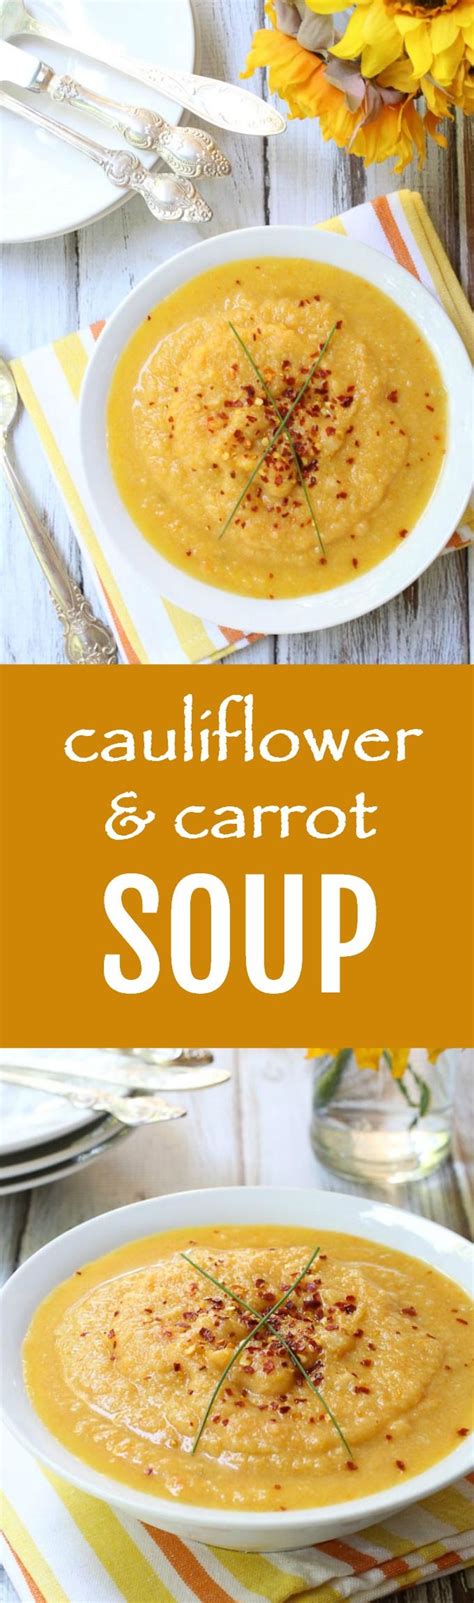 This Creamy Cauliflower And Carrot Soup Is Very Light The Sweetness Of